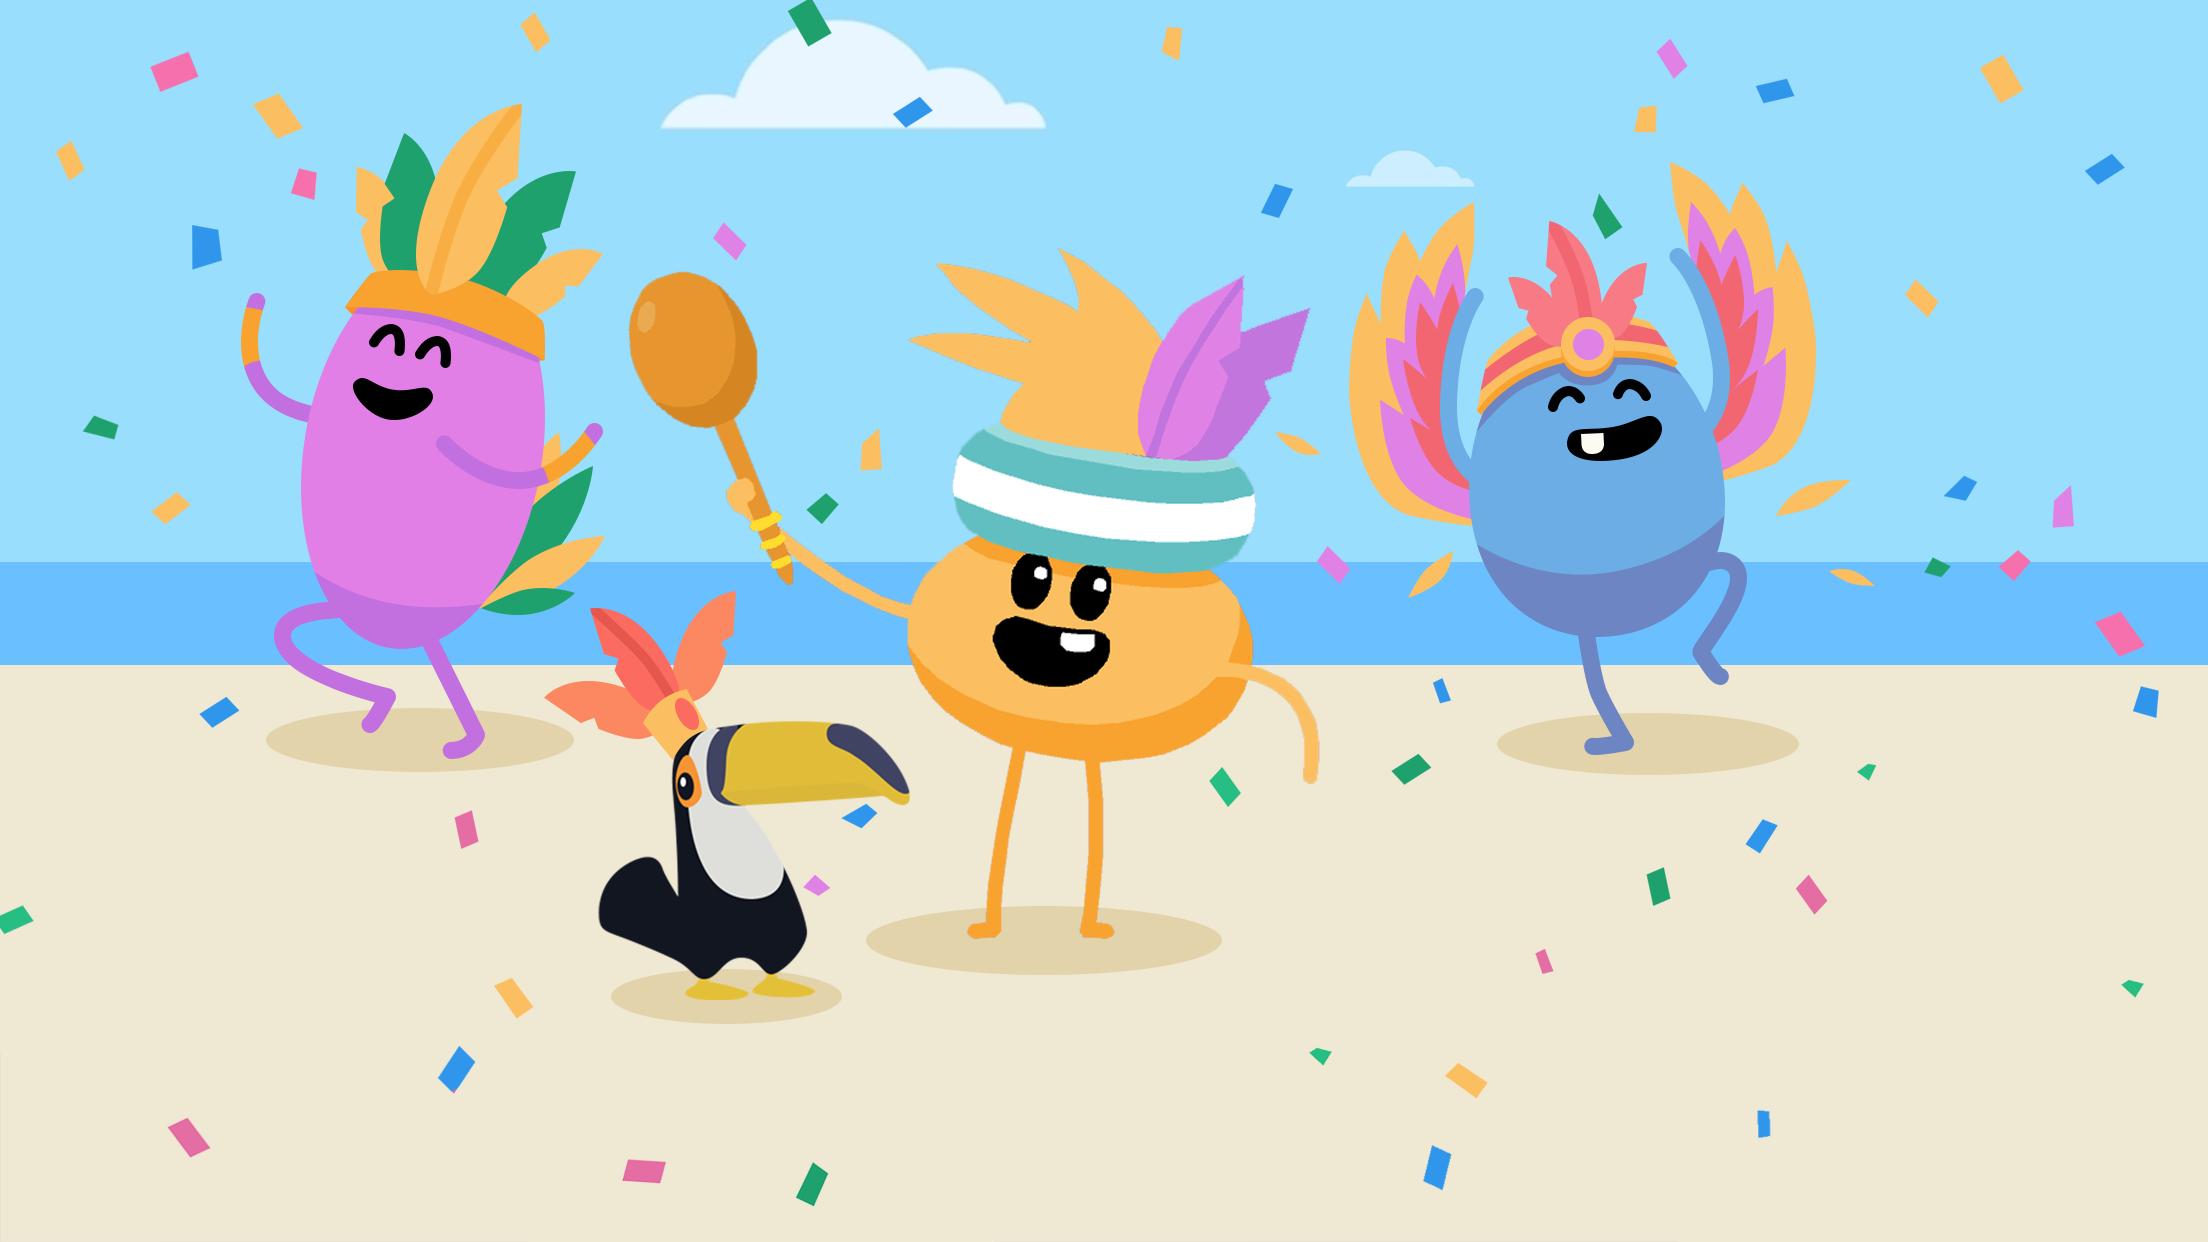 Dumb Ways to Die 2: The Games for Android - APK Download